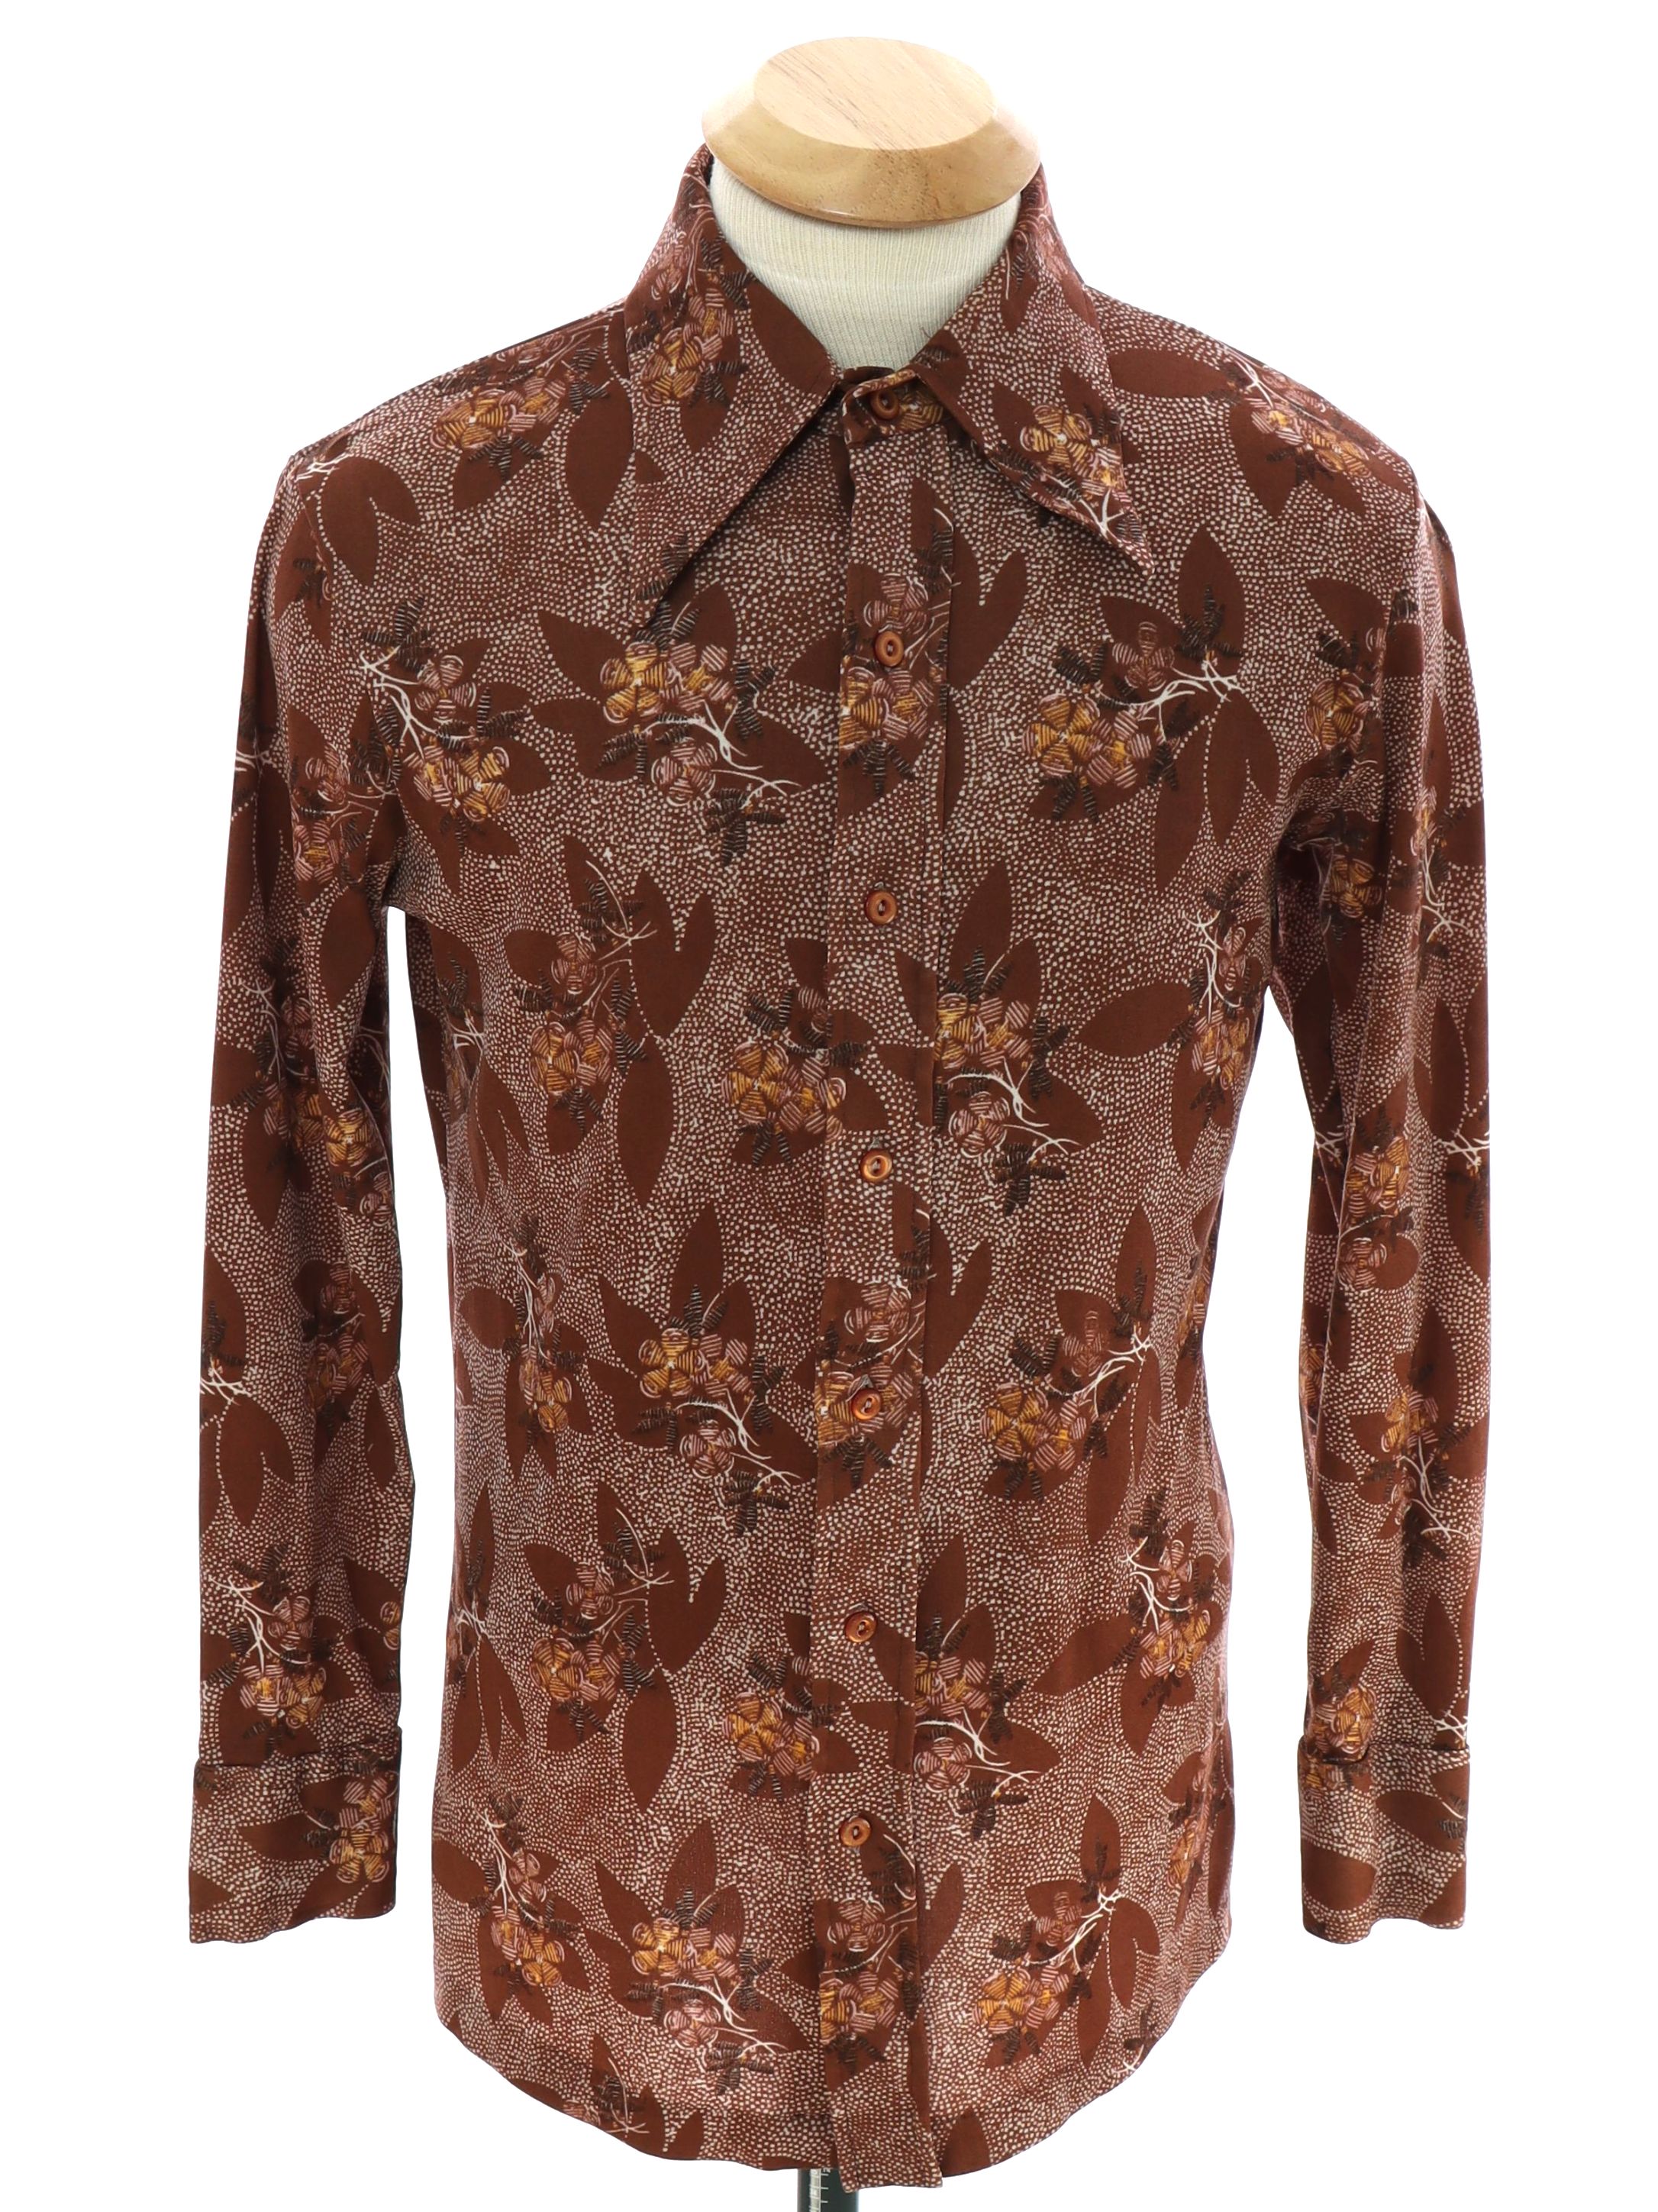 Retro Seventies Print Disco Shirt: 70s -Huk A Poo- Unisex Ladies or Boys  brown background nylon button cuff longsleeve button up front print disco  shirt with white dotted pattern and floral pattern